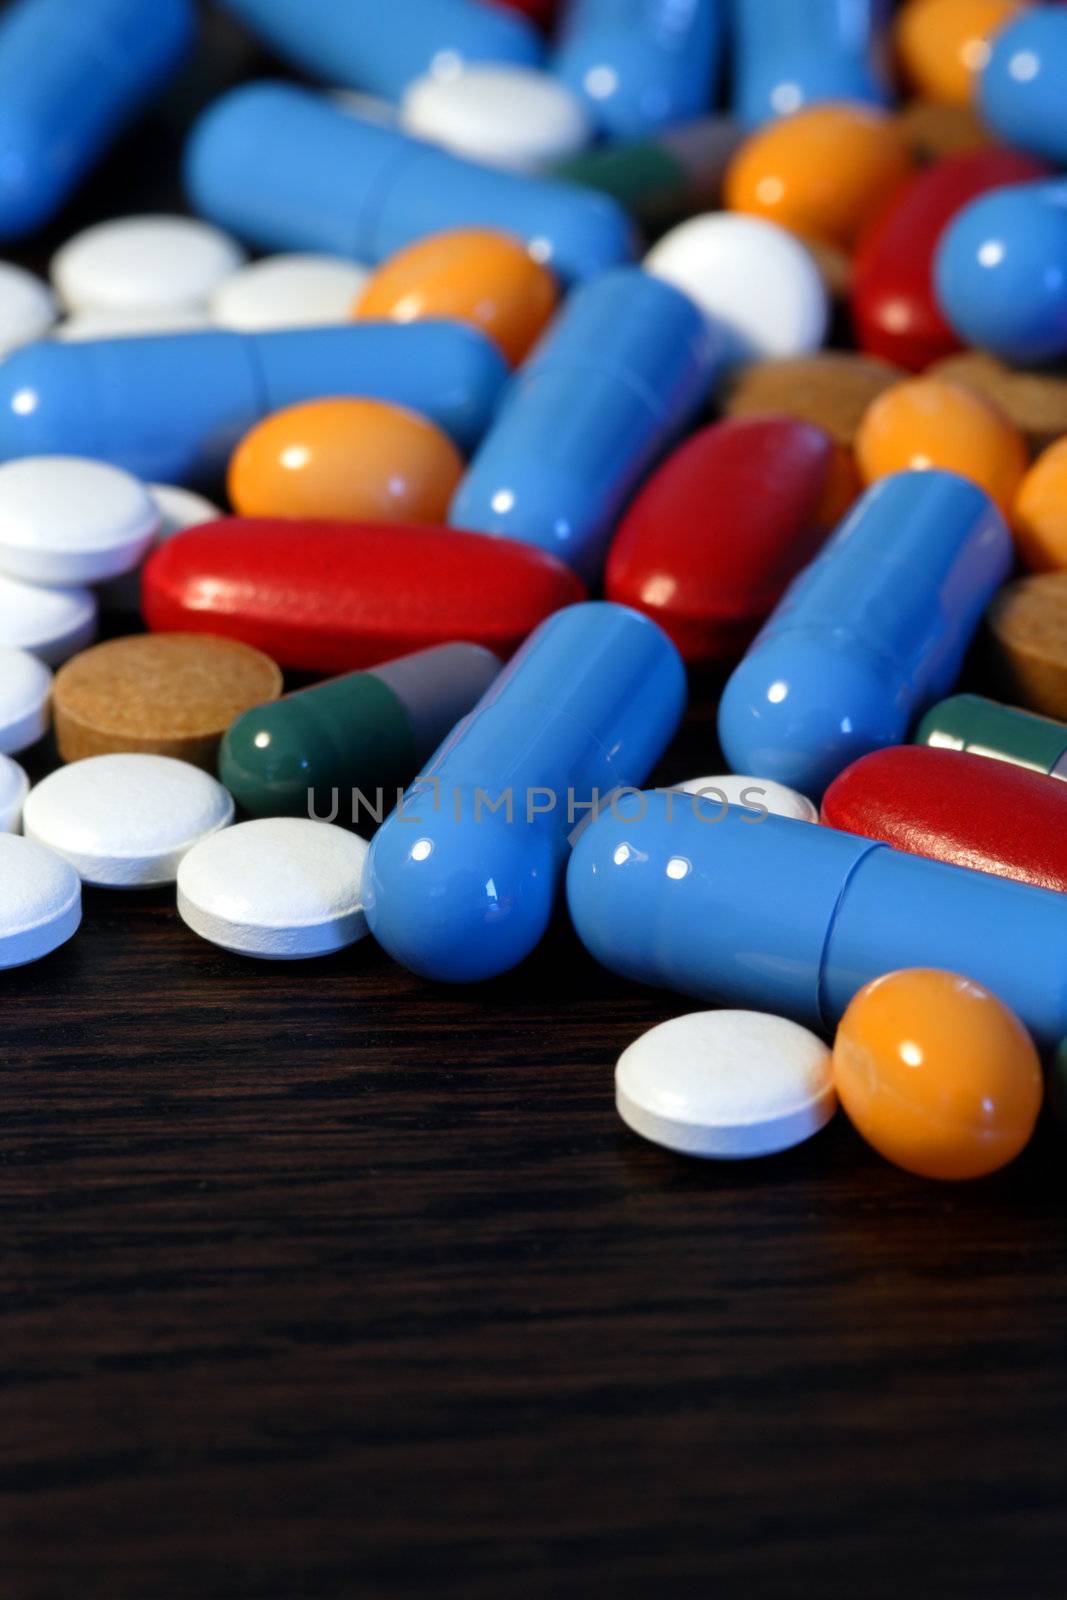 Collection of assorted pills on a dark wood table. Shallow depth-of-field.
